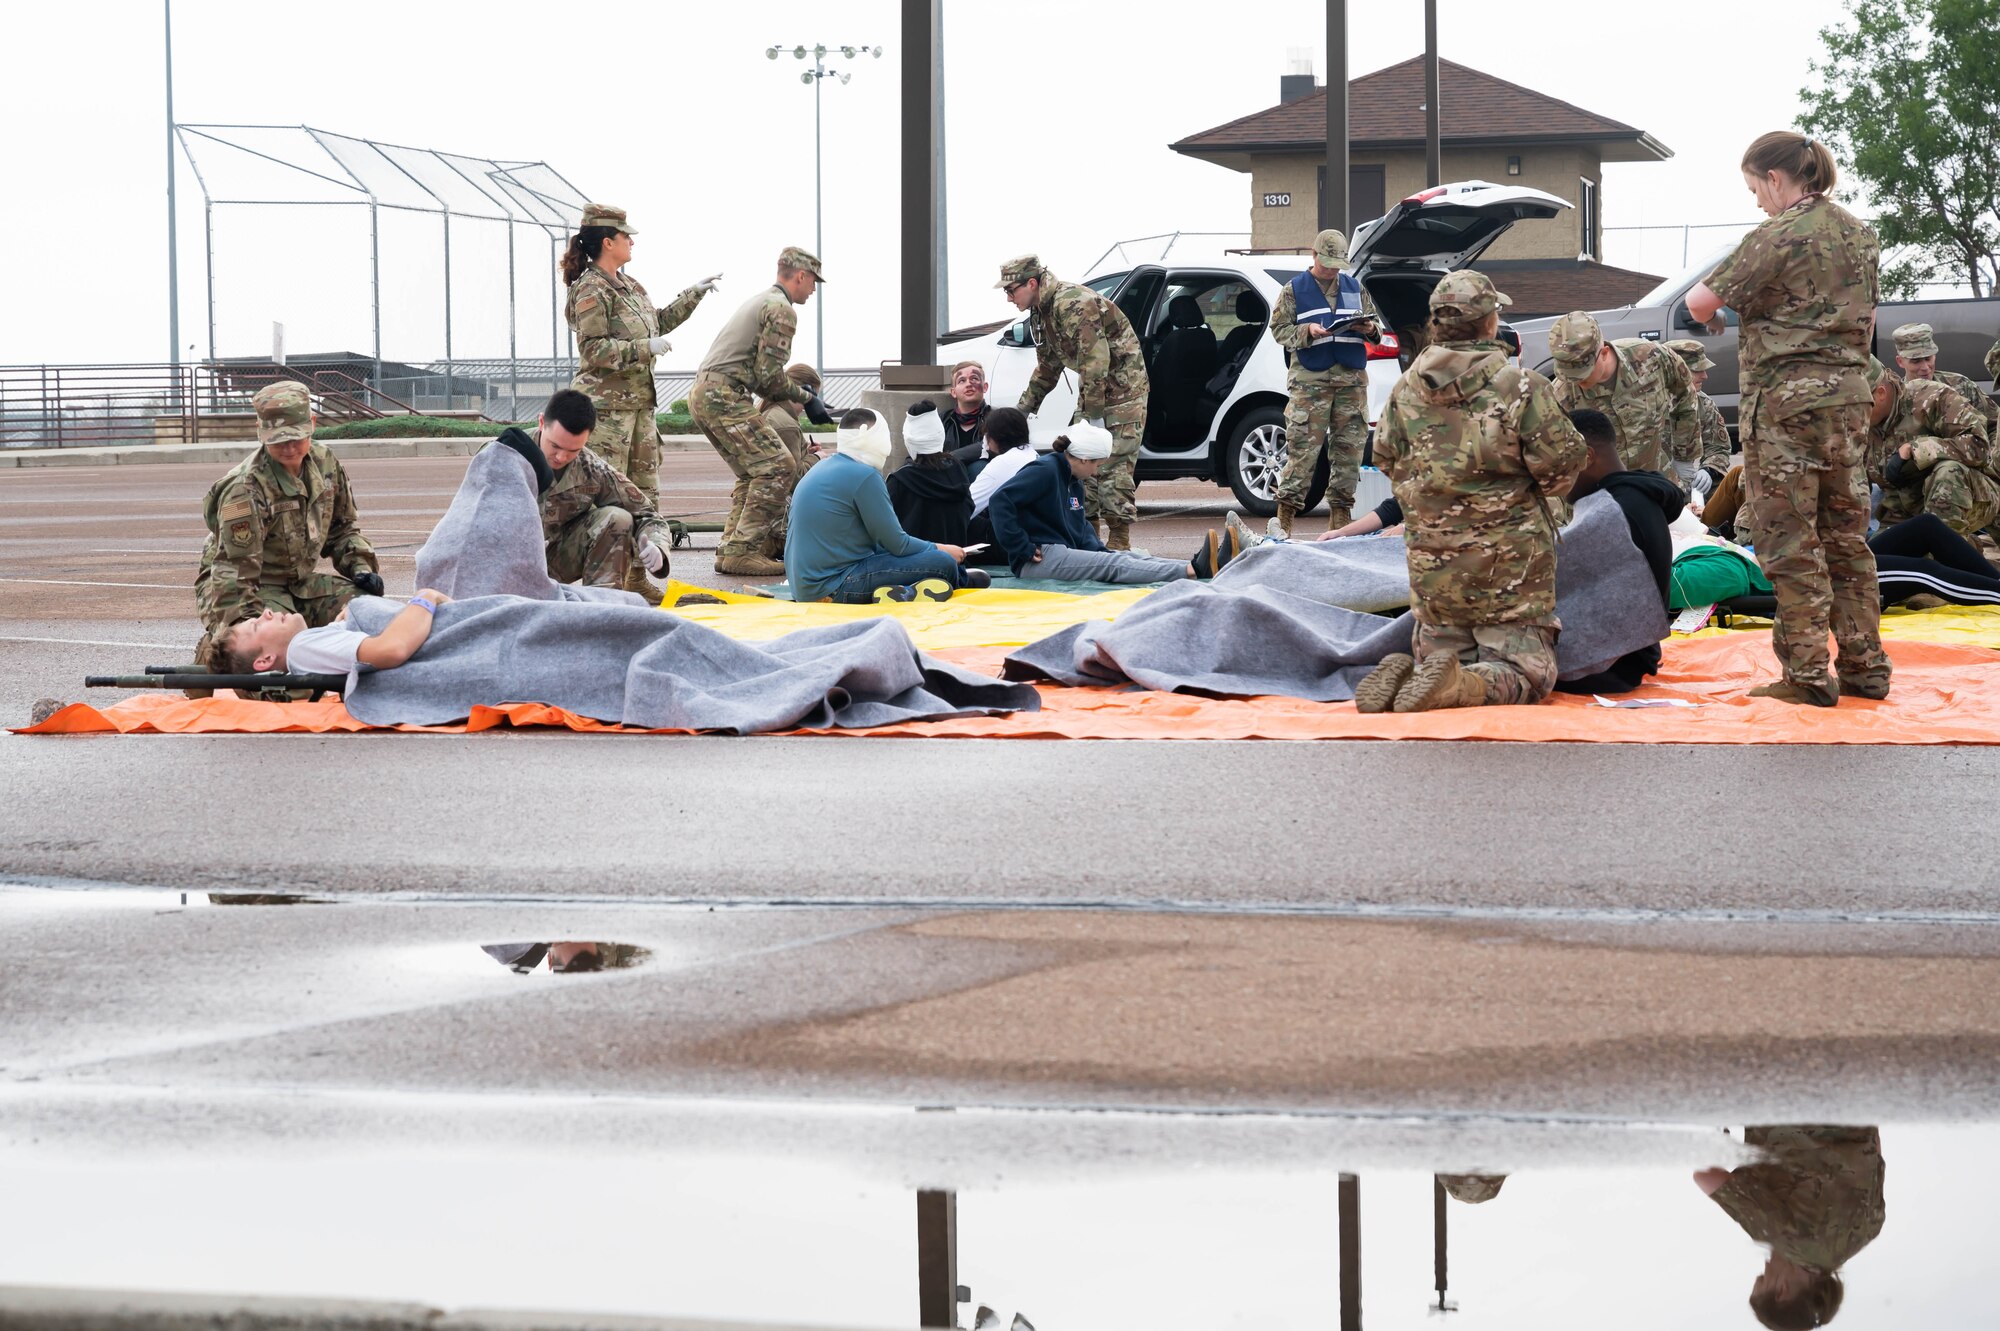 Members of the 341st Medical Group assess and provide initial treatment for patients simulated by volunteers during a medical readiness exercise Aug. 20, 2021 at Malmstrom Air Force Base, Mont.